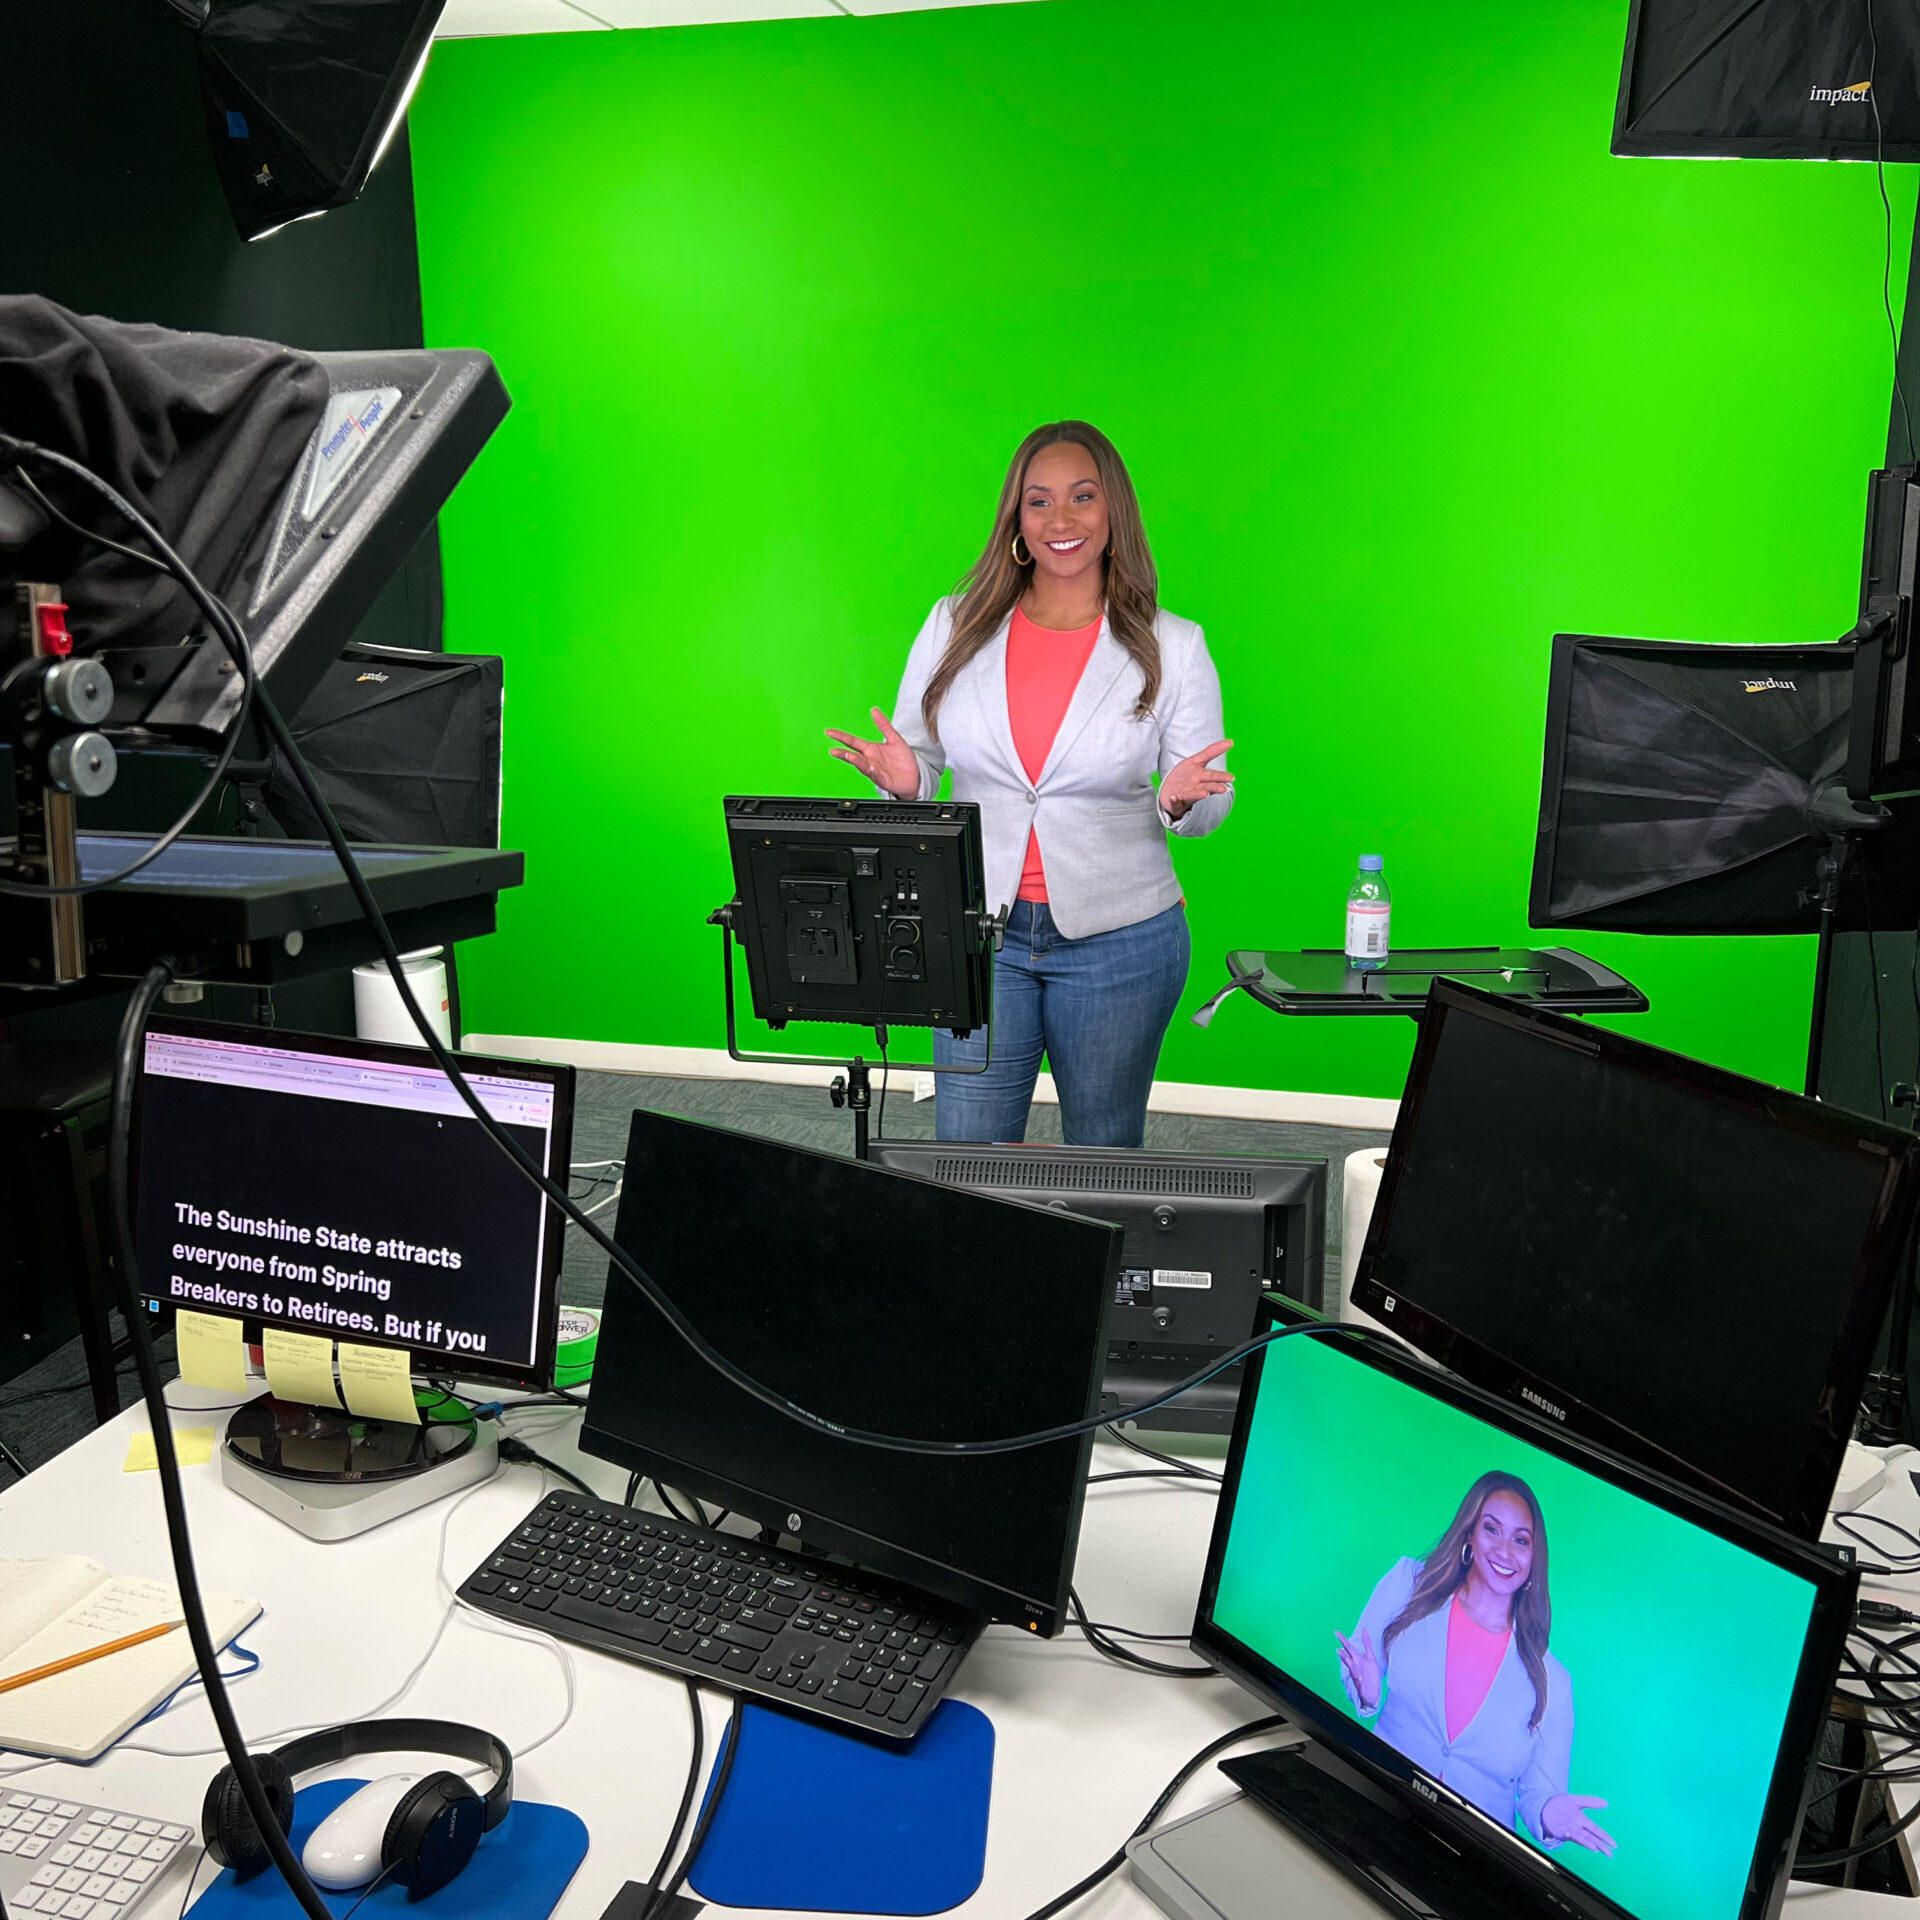 Tamika in front of a green screen in a video production room